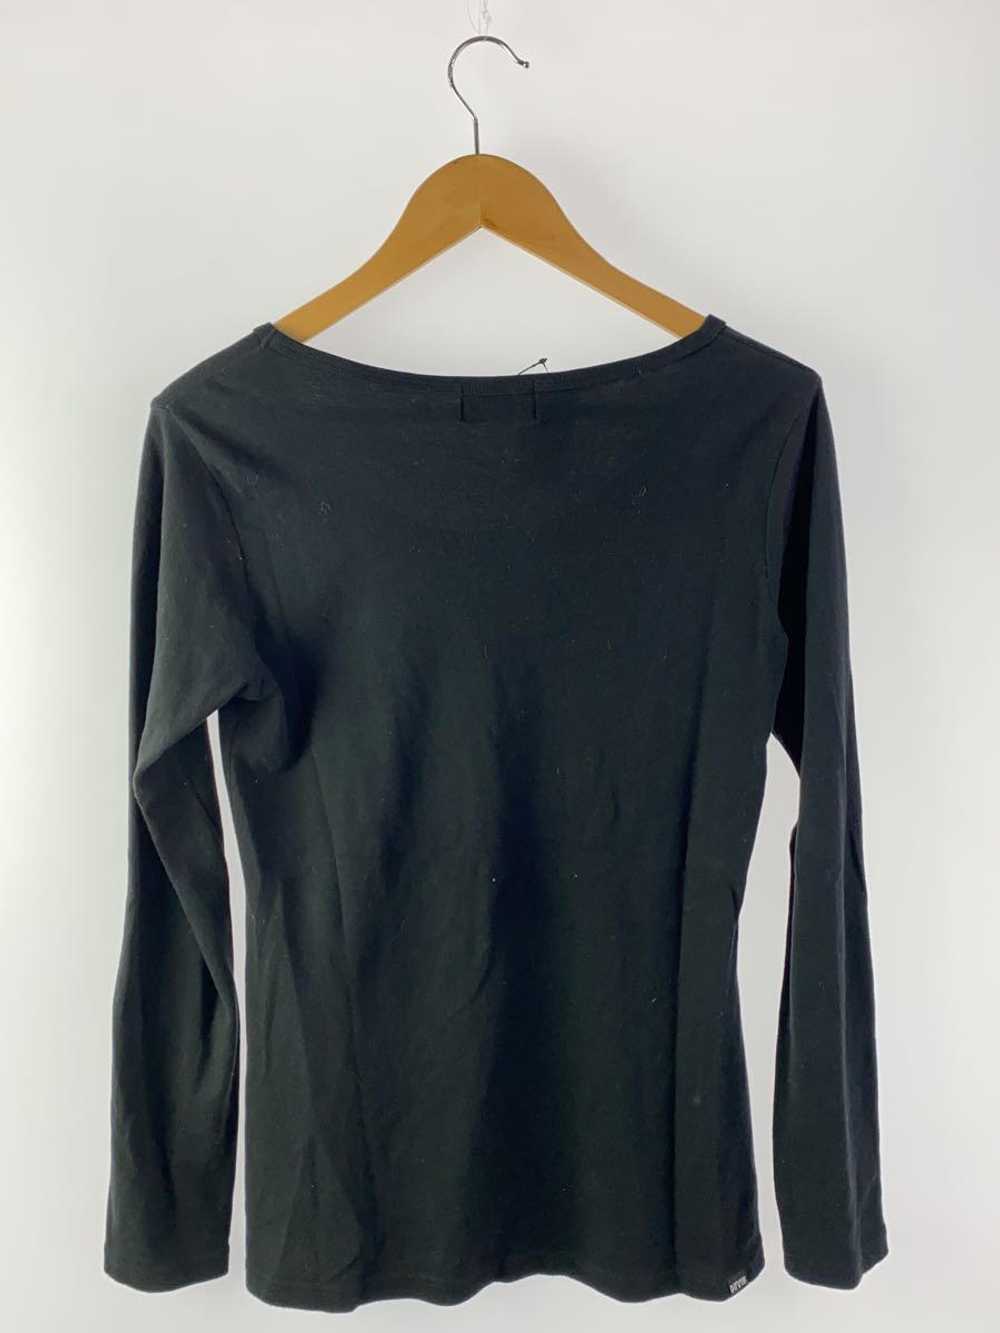 Used Hysteric Glamor Long Sleeve T-Shirt/Free/Cot… - image 2